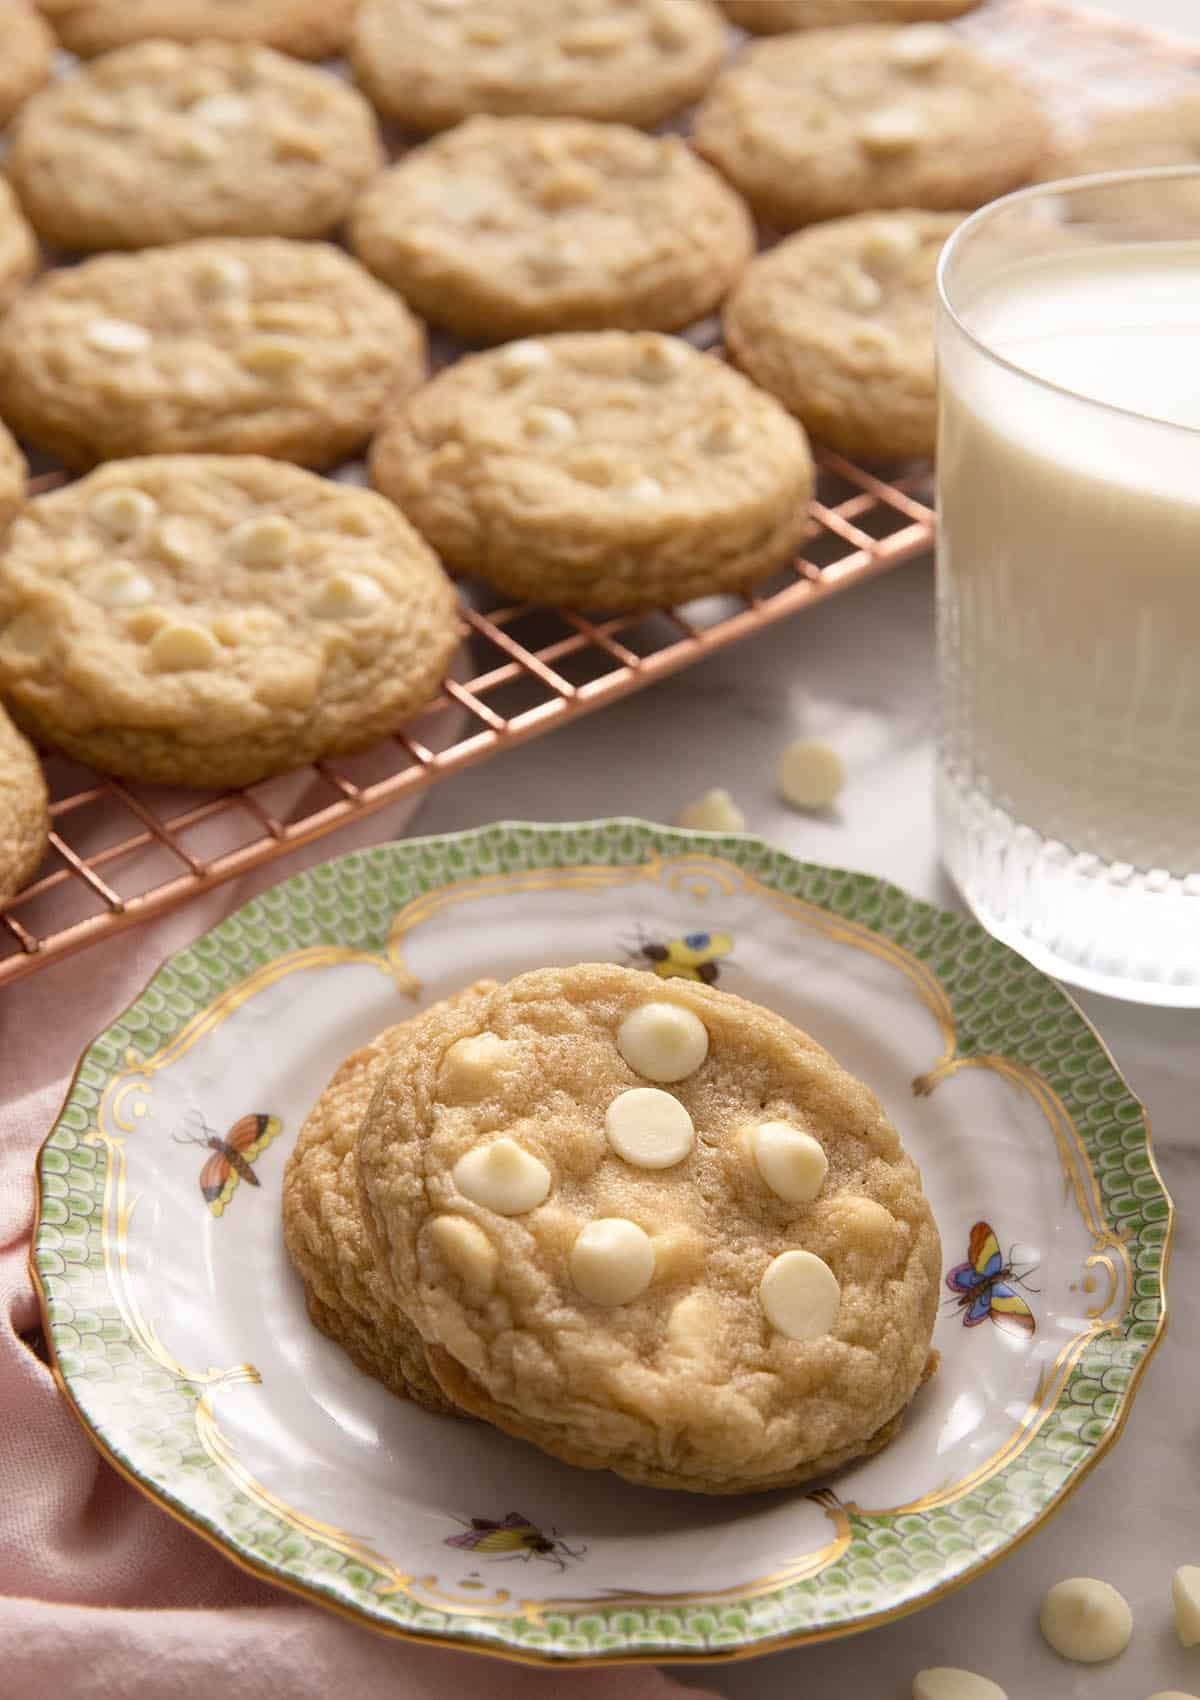 White chocolate chip cookies on a small plate and some on a cooling rack